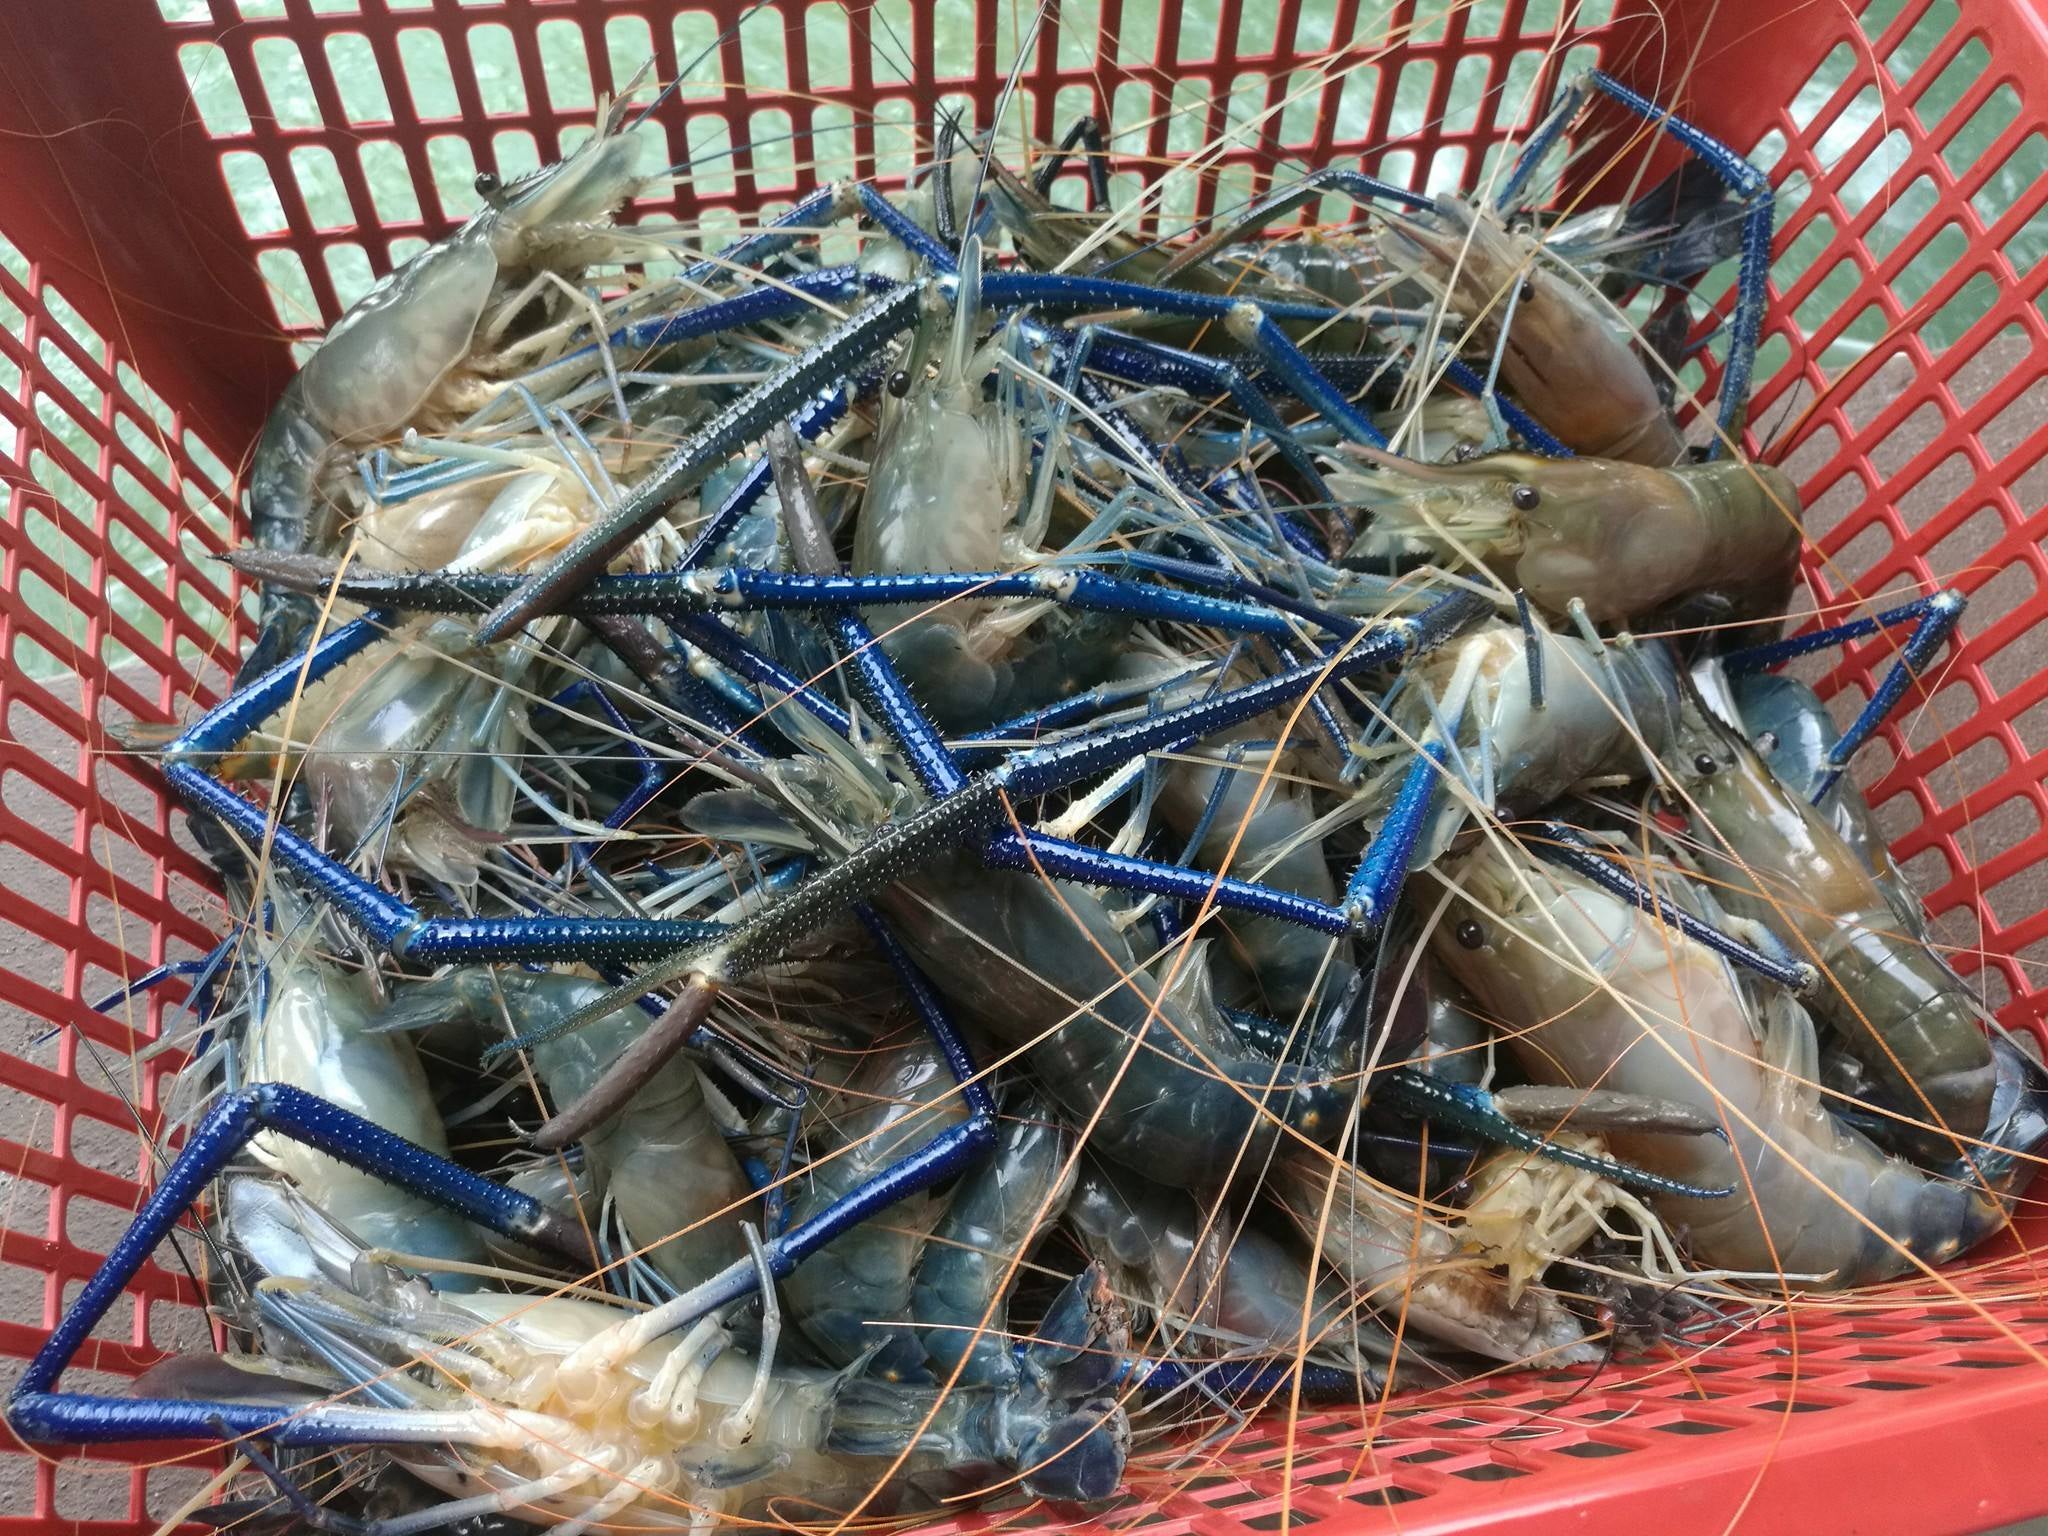 You Can Now Fish For Your Own Prawns And Crabs To Grill Here! - World Of Buzz 2